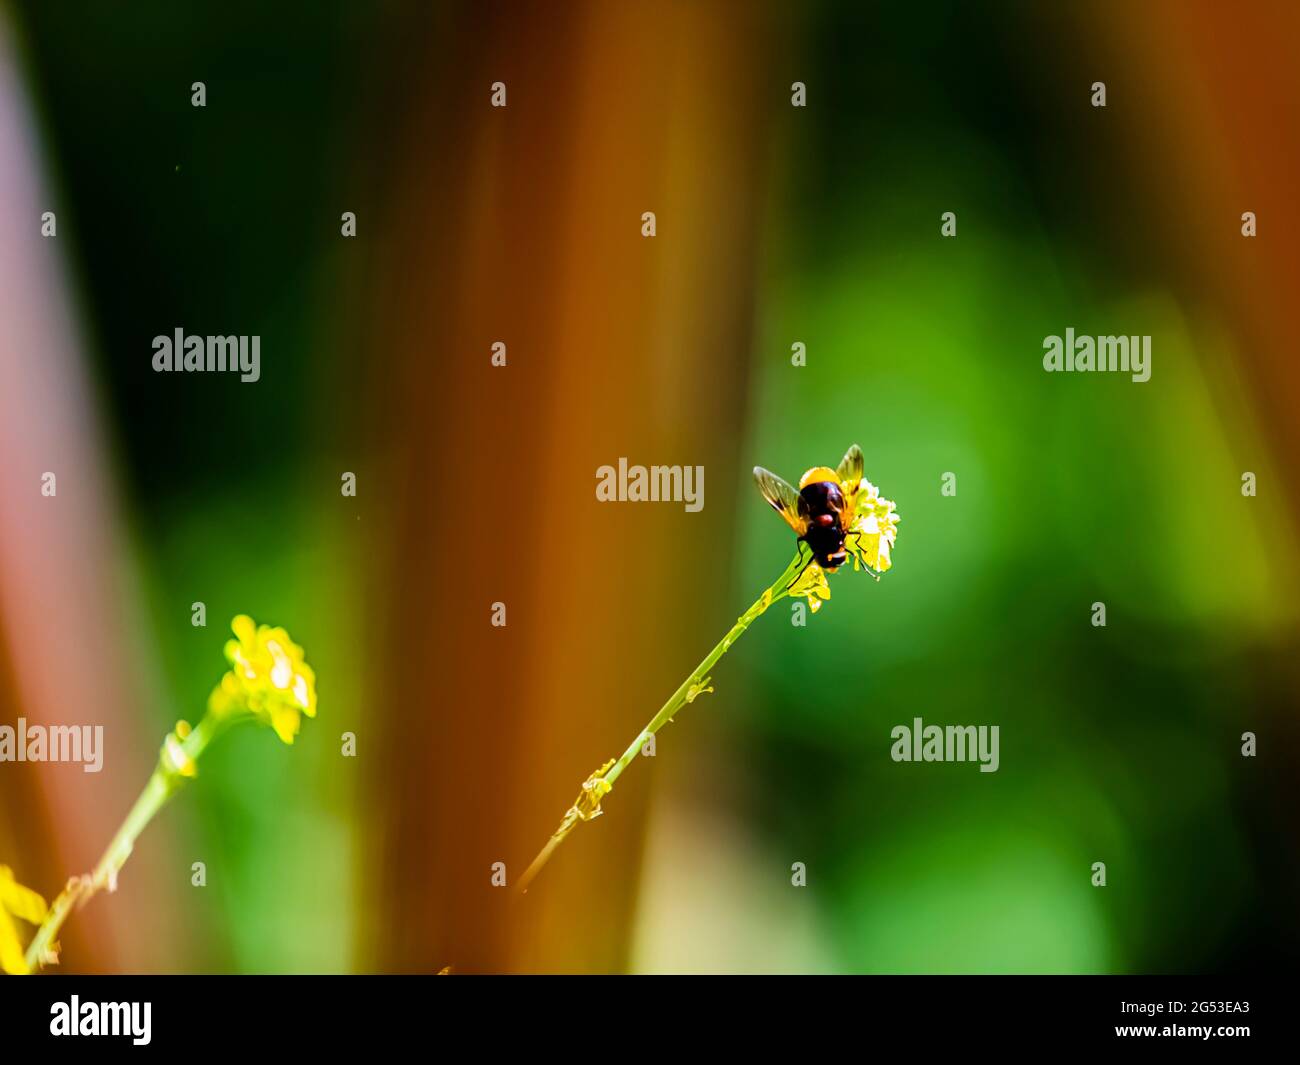 A beautiful bee on a yellow flower with a green blurred natural background Stock Photo